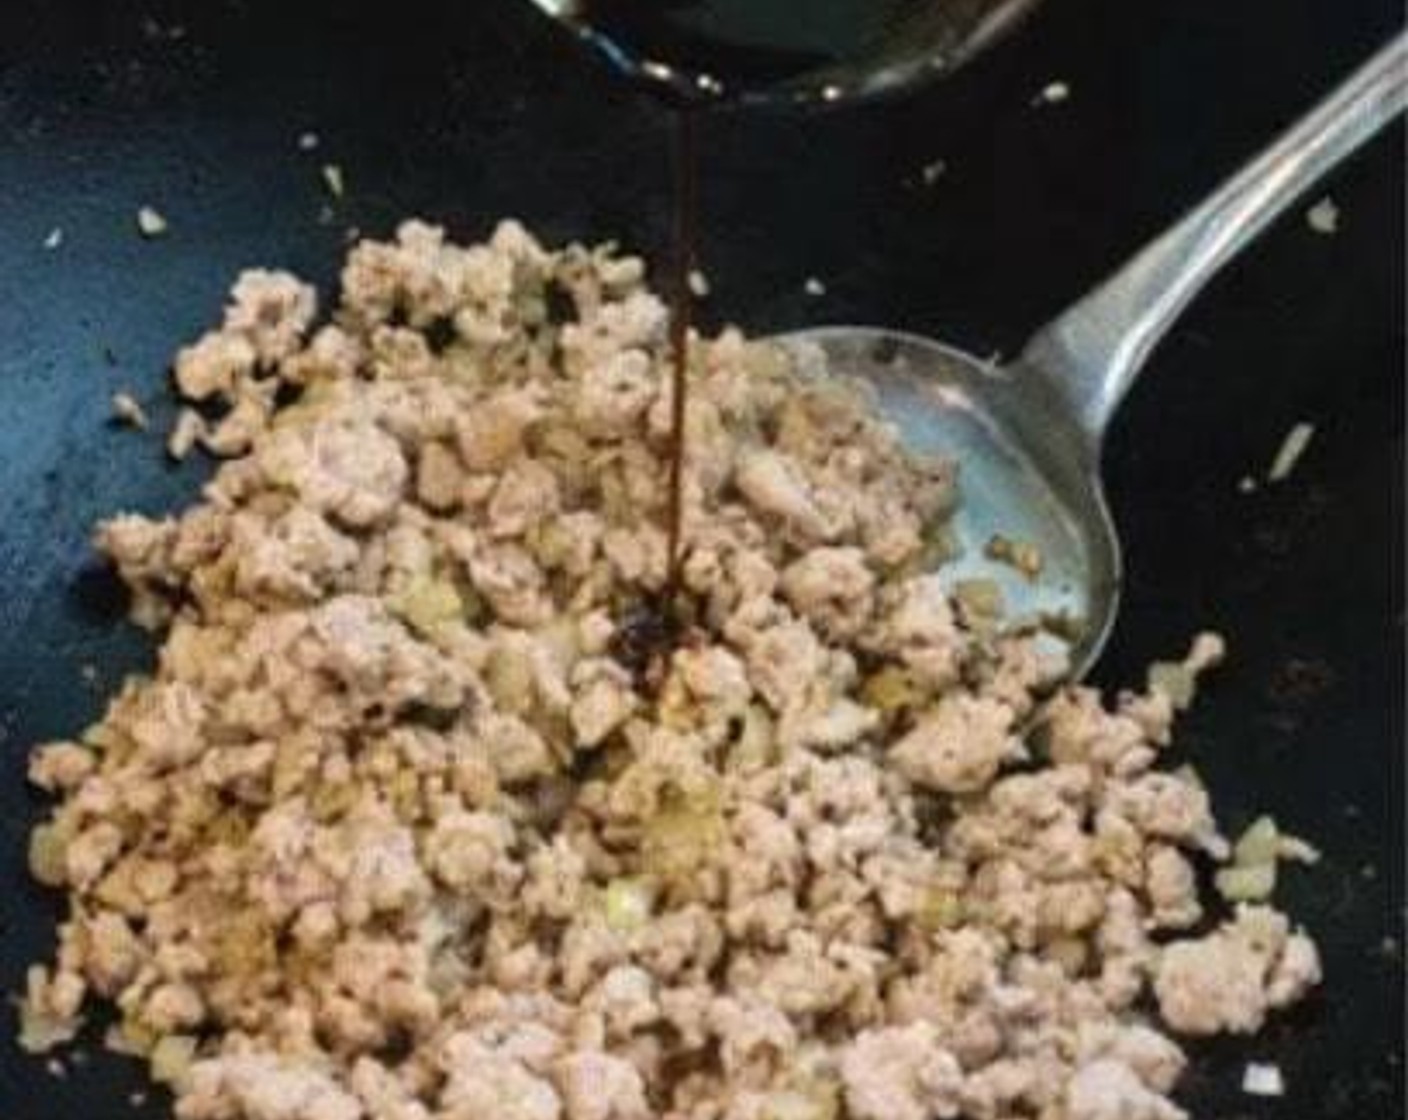 step 5 Add the Ground Pork (1 lb) to the wok and stir-fry until no longer pink. Return the onion and garlic mixture to the wok. When ground pork has cooked all the way through, stir in the sauce and mix well until the ground pork is thoroughly coated in the sauce.